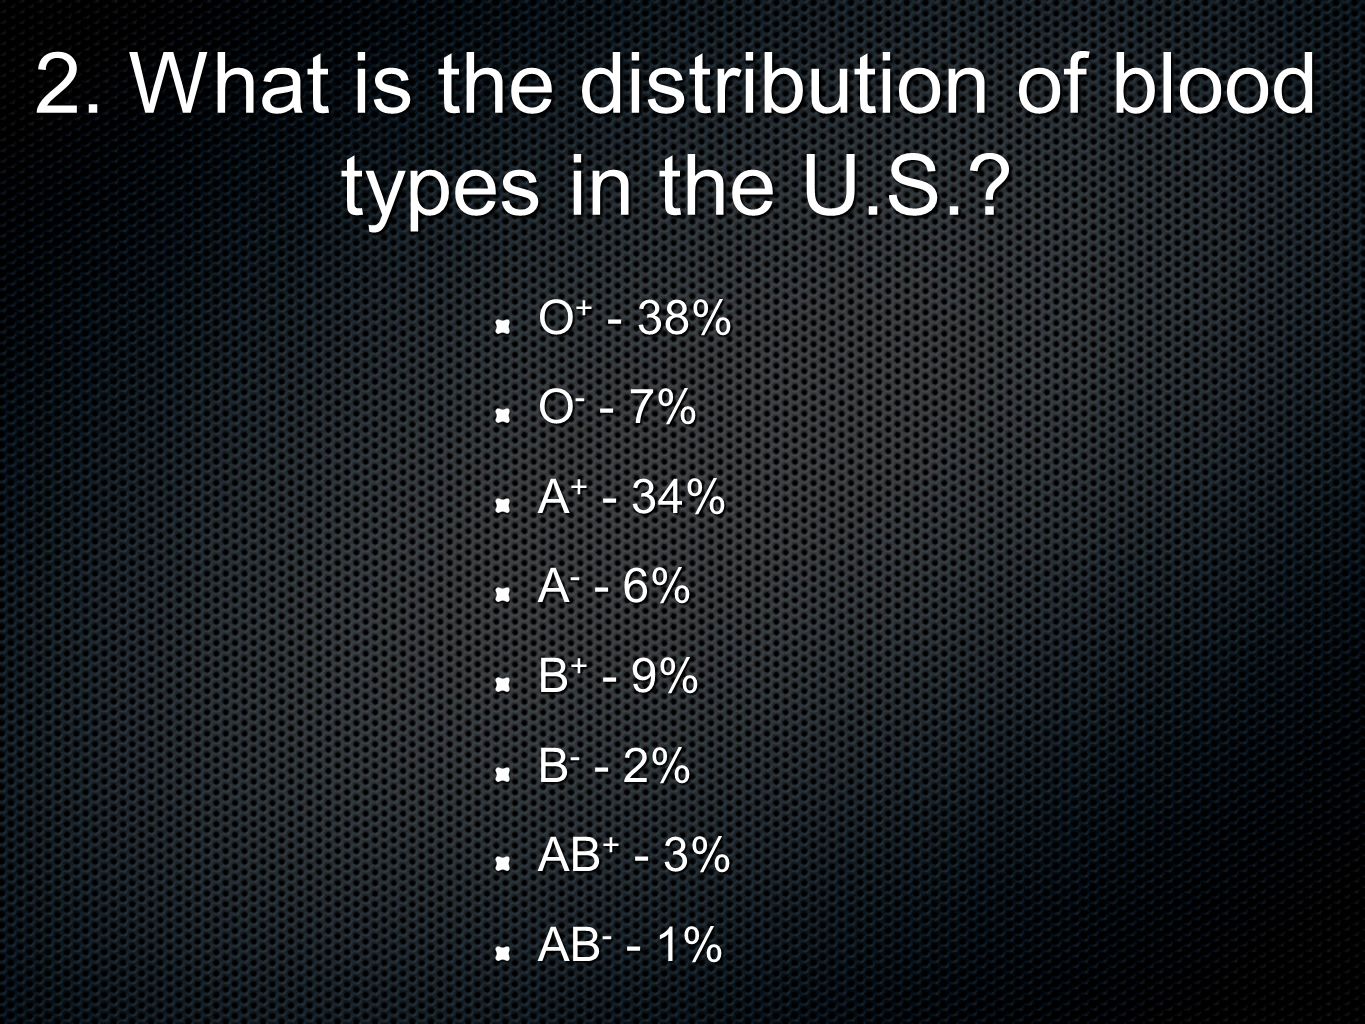 2. What is the distribution of blood types in the U.S..